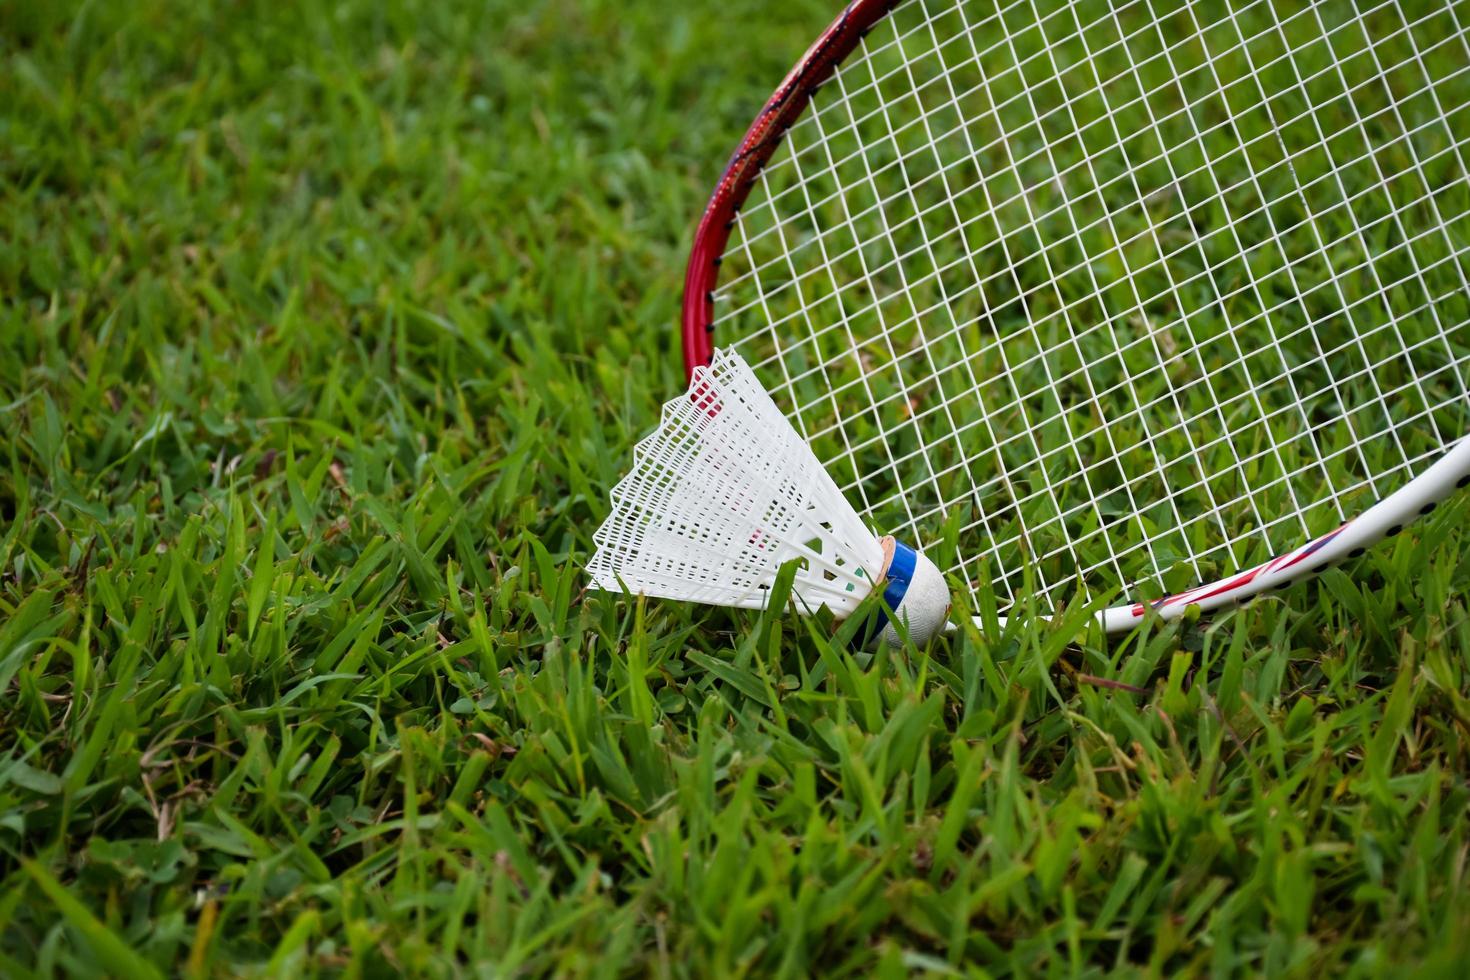 Badminton outdoors equipments shuttlecocks and badminton rackets, on grasslawn, soft and selective focus on shuttlecocks, outdoor badminton playing concept photo